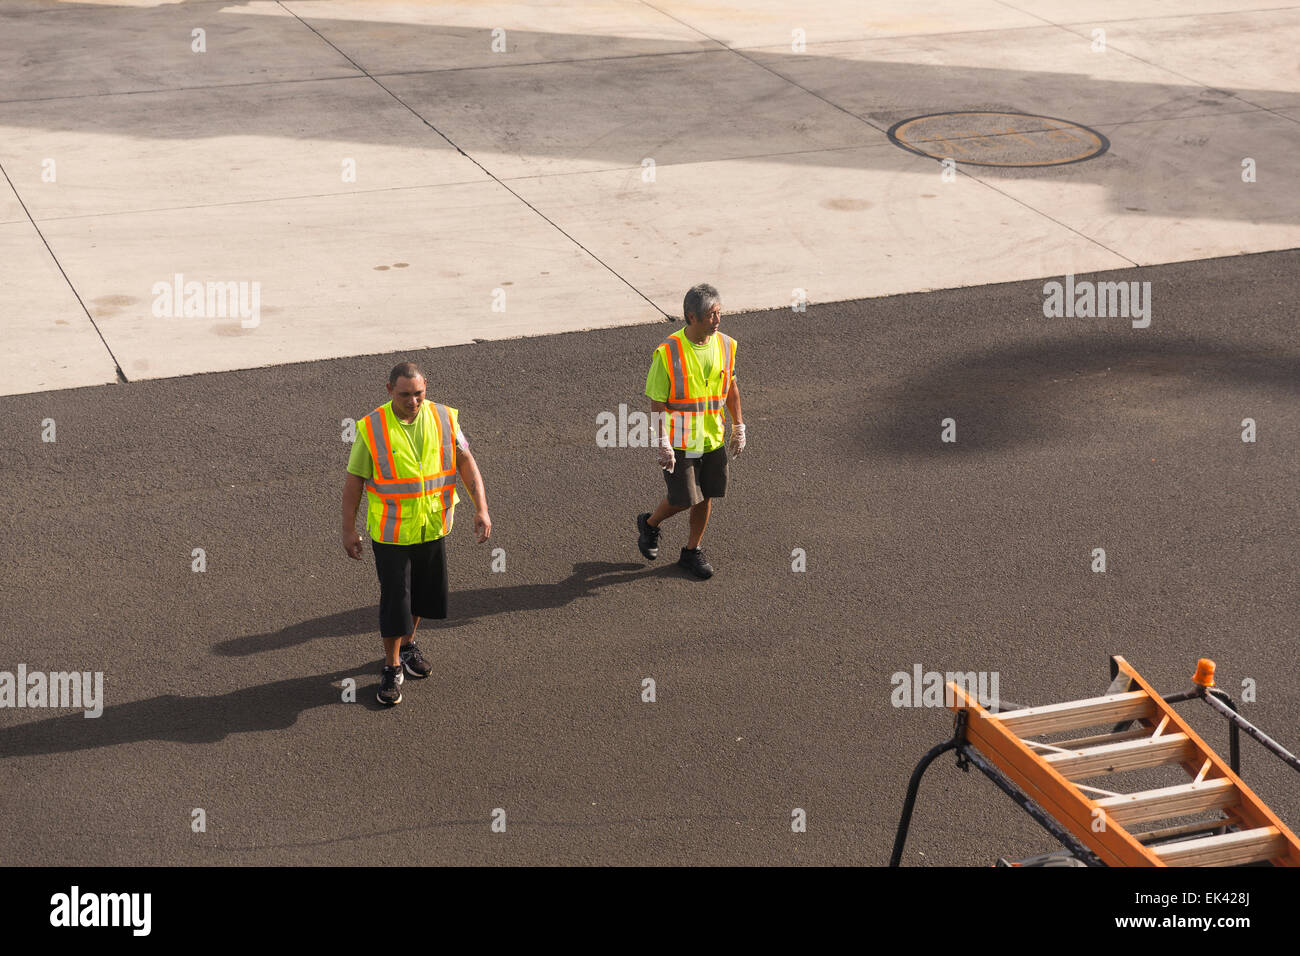 Airport workers walking on a tarmac wearing bright green orange safety vests Stock Photo